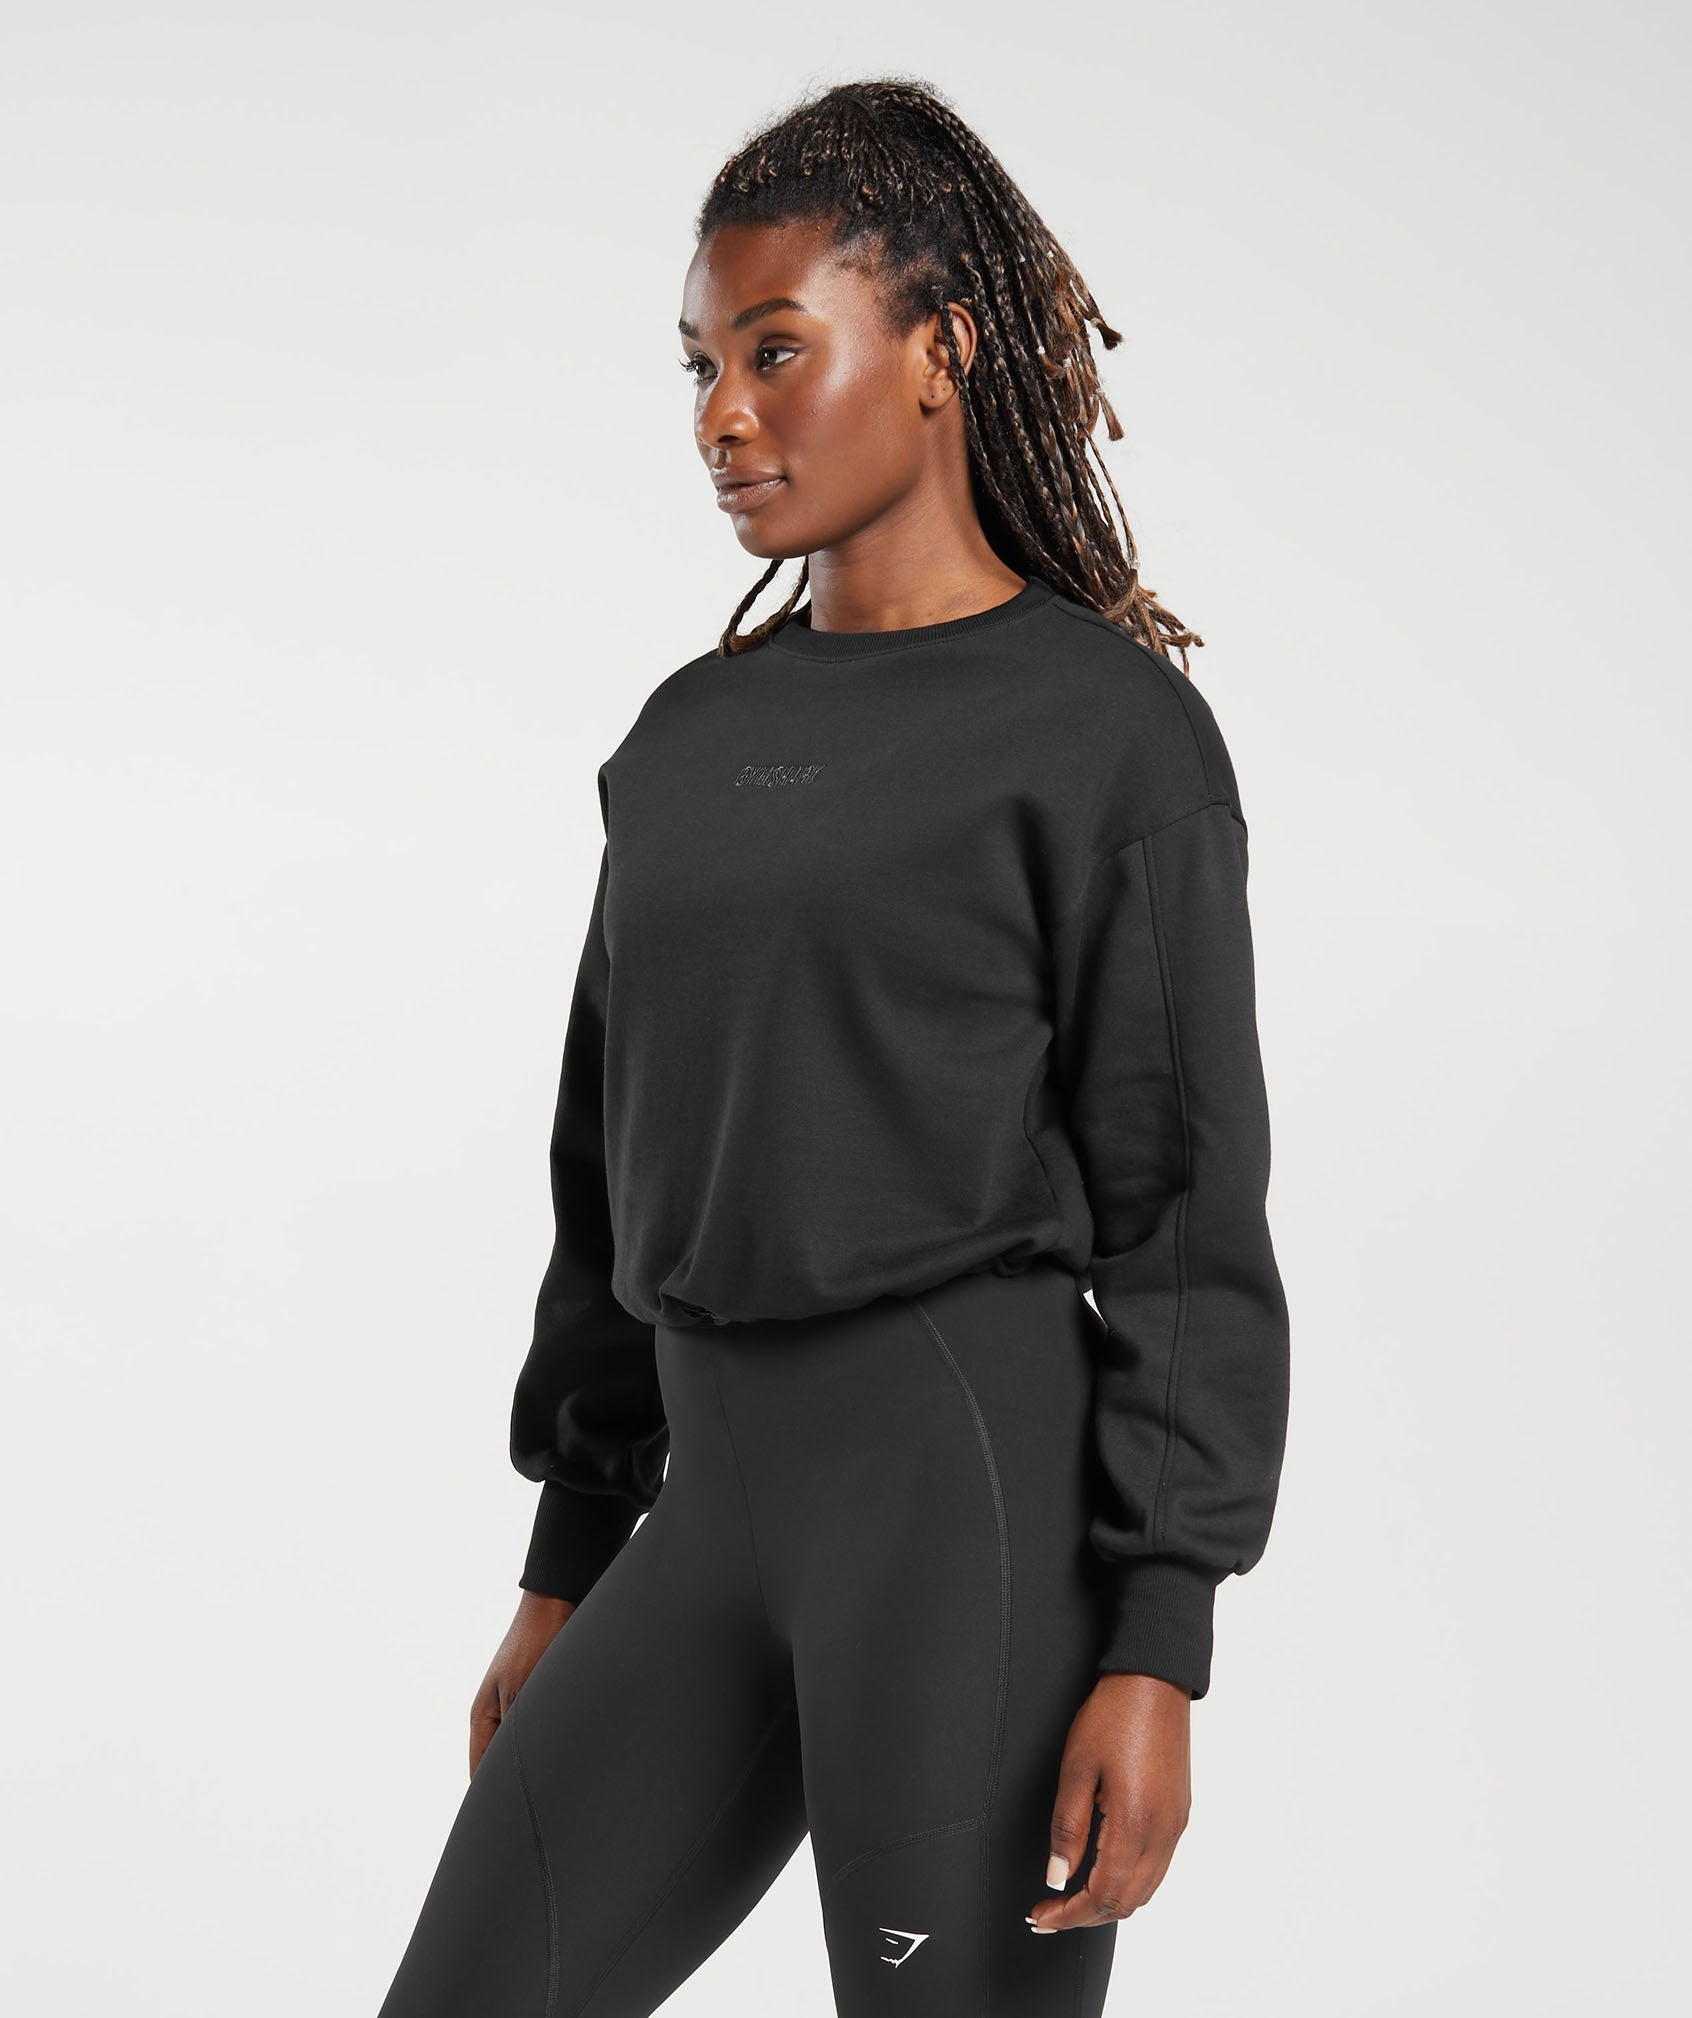 Pulse Pullover in Black - view 3